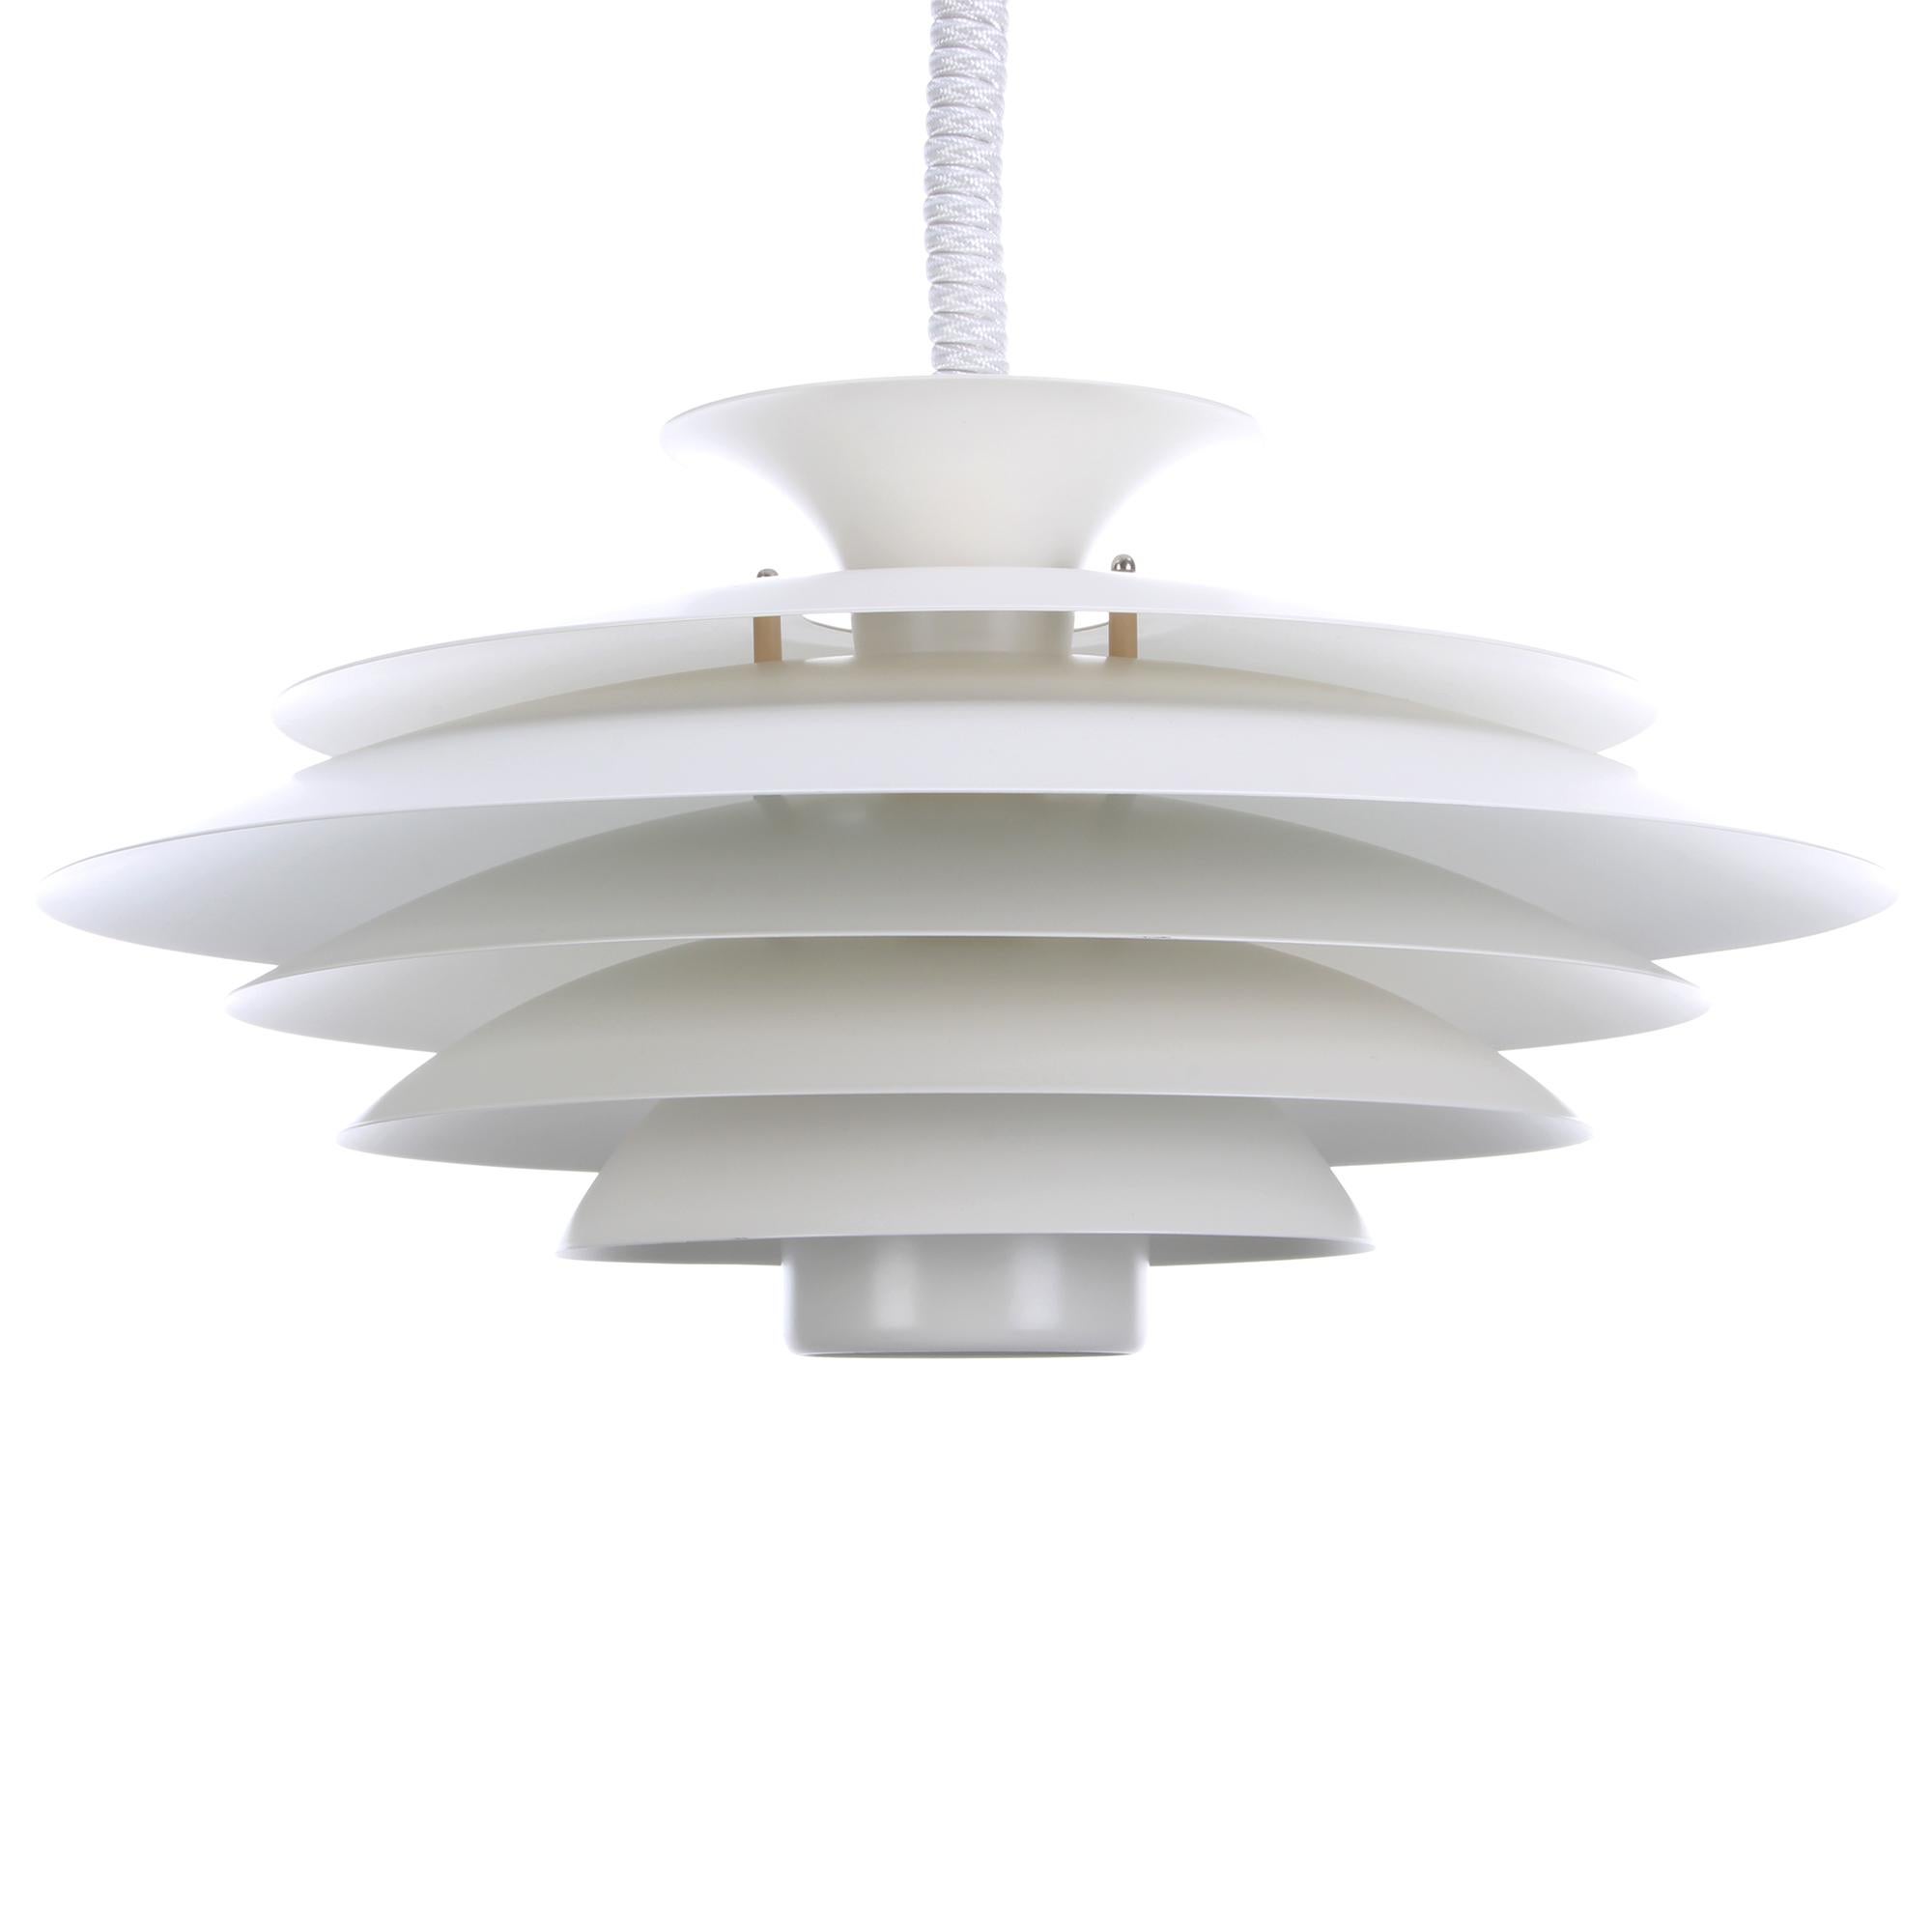 Minimalist No. 52580 Large White Lamp by Form-Light, 1980s, Denmark